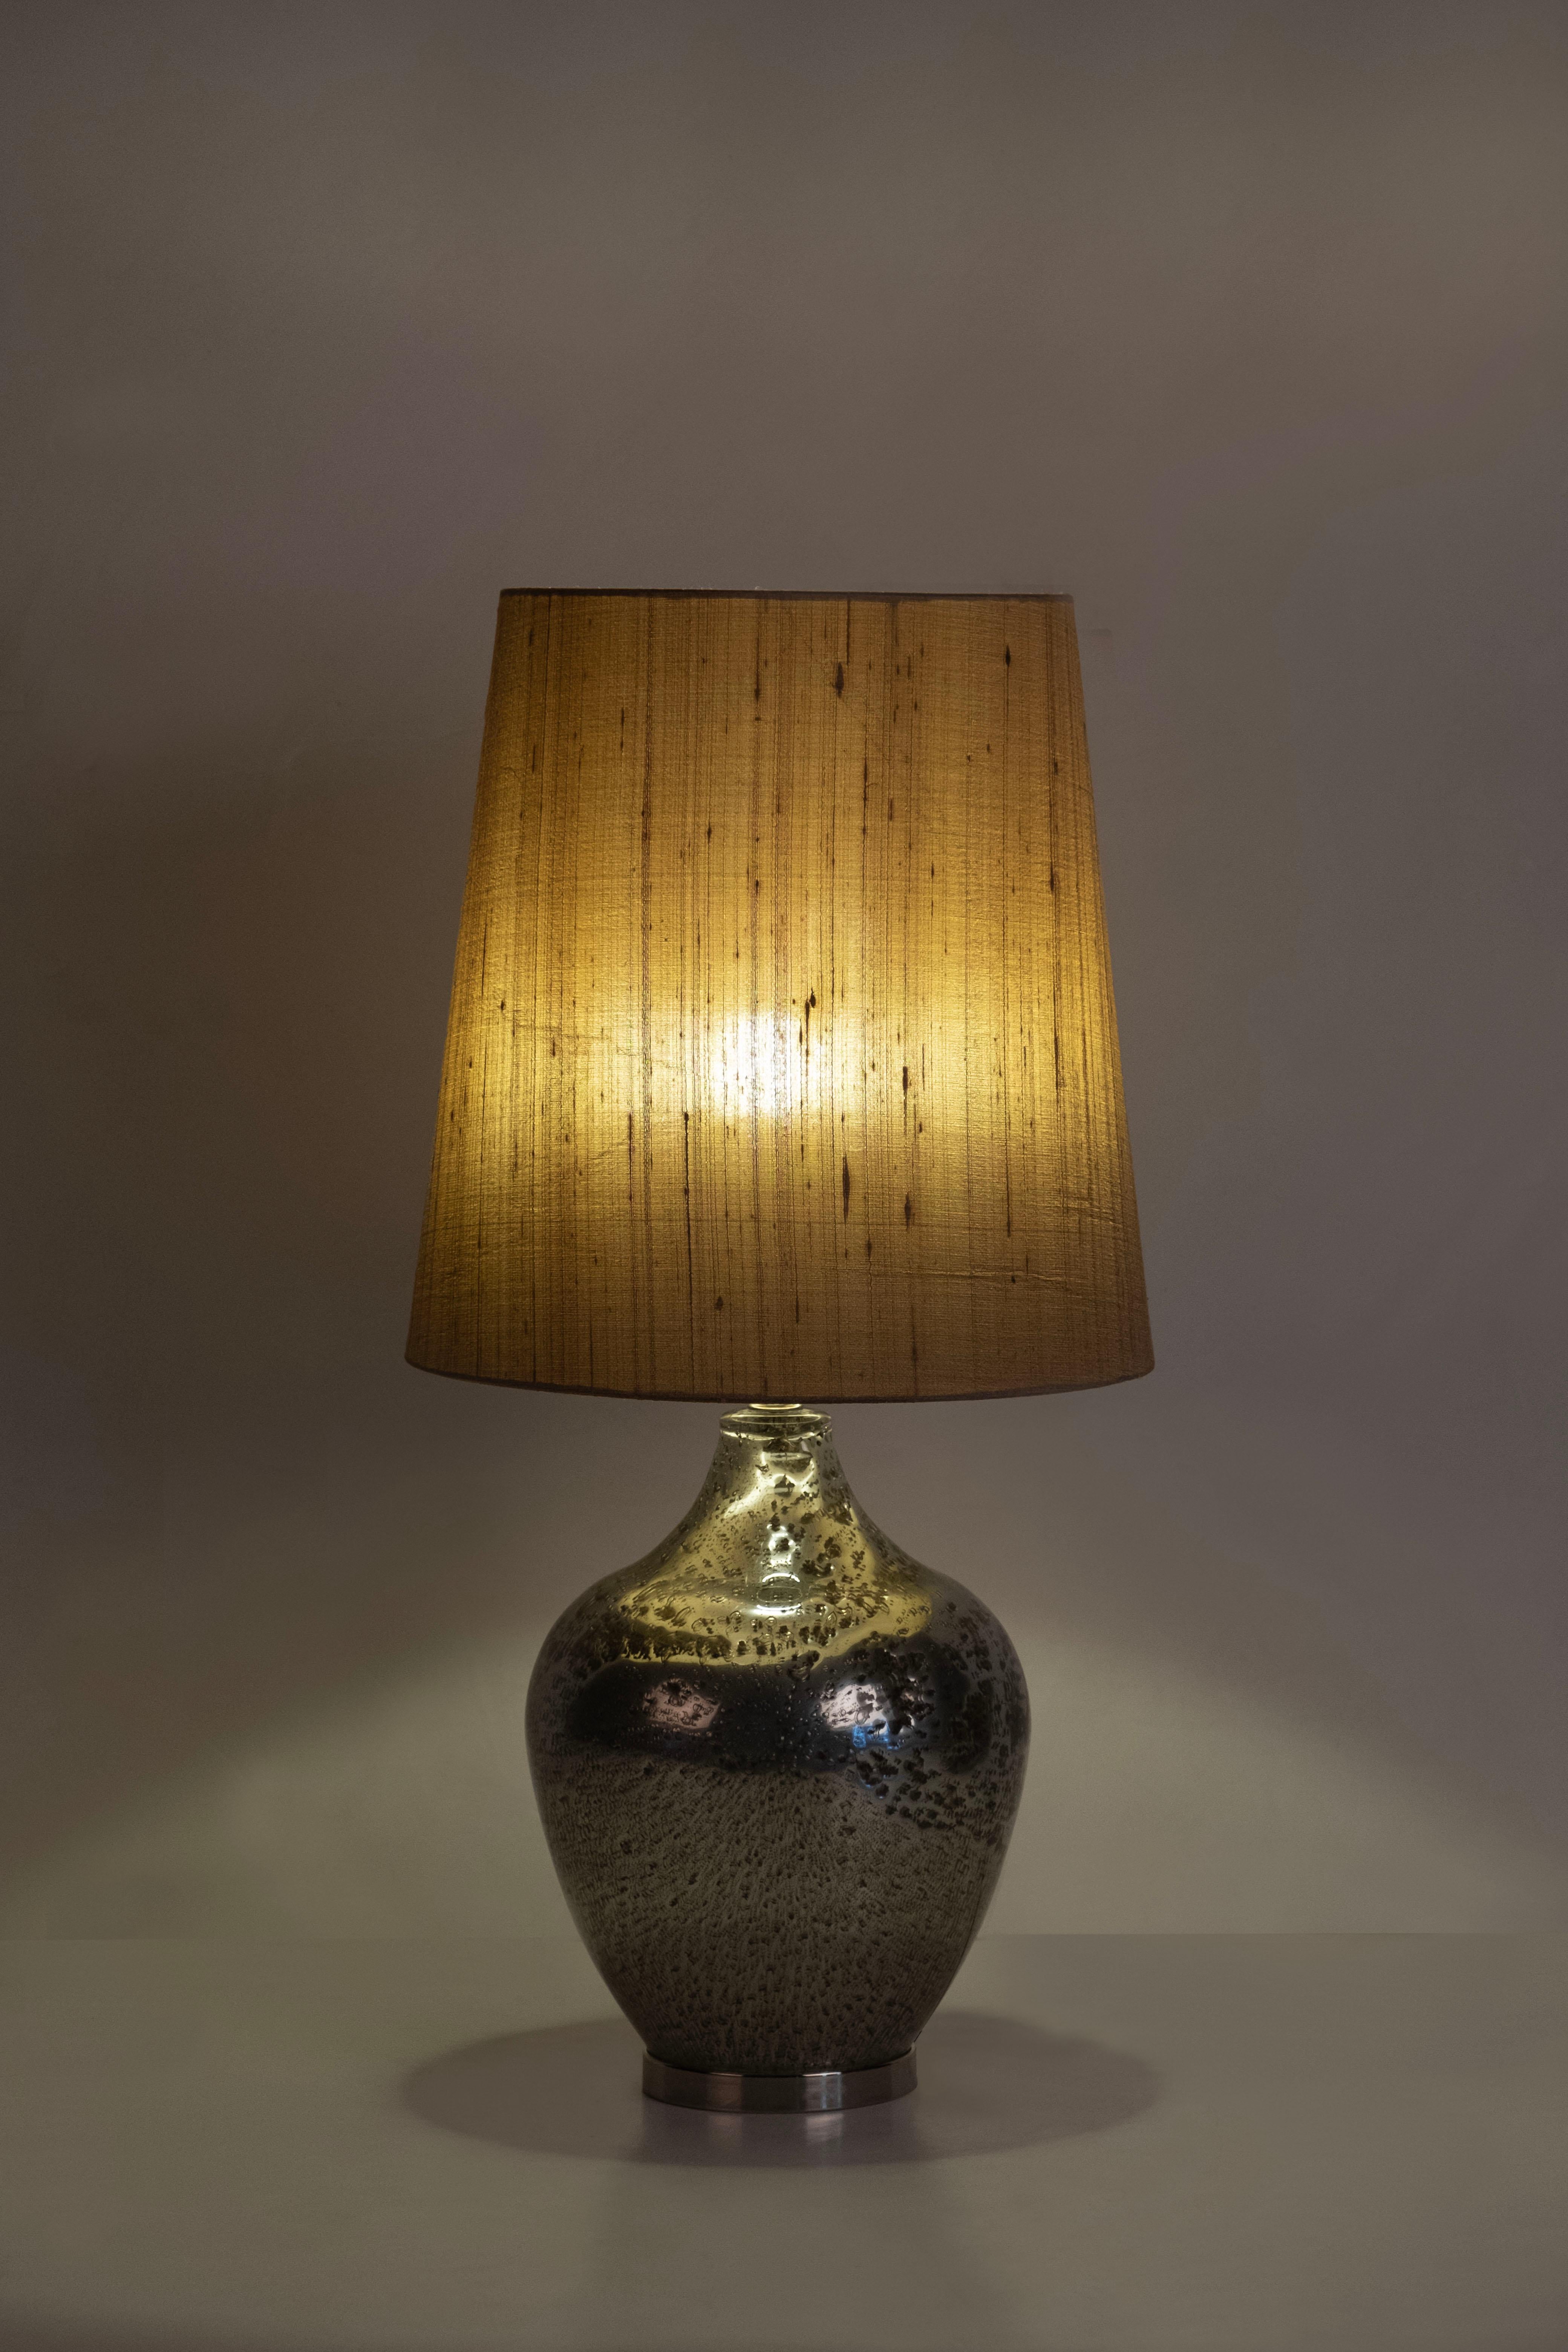 Set/2 Modern Table Lamps, Glass Base, Silk Lampshade, Handcrafted in Portugal - Europe by GF Modern.

This is an elegant table lamp and an attractive addition to a modern home. The mirrored glass and polished stainless steel gracefully combine with